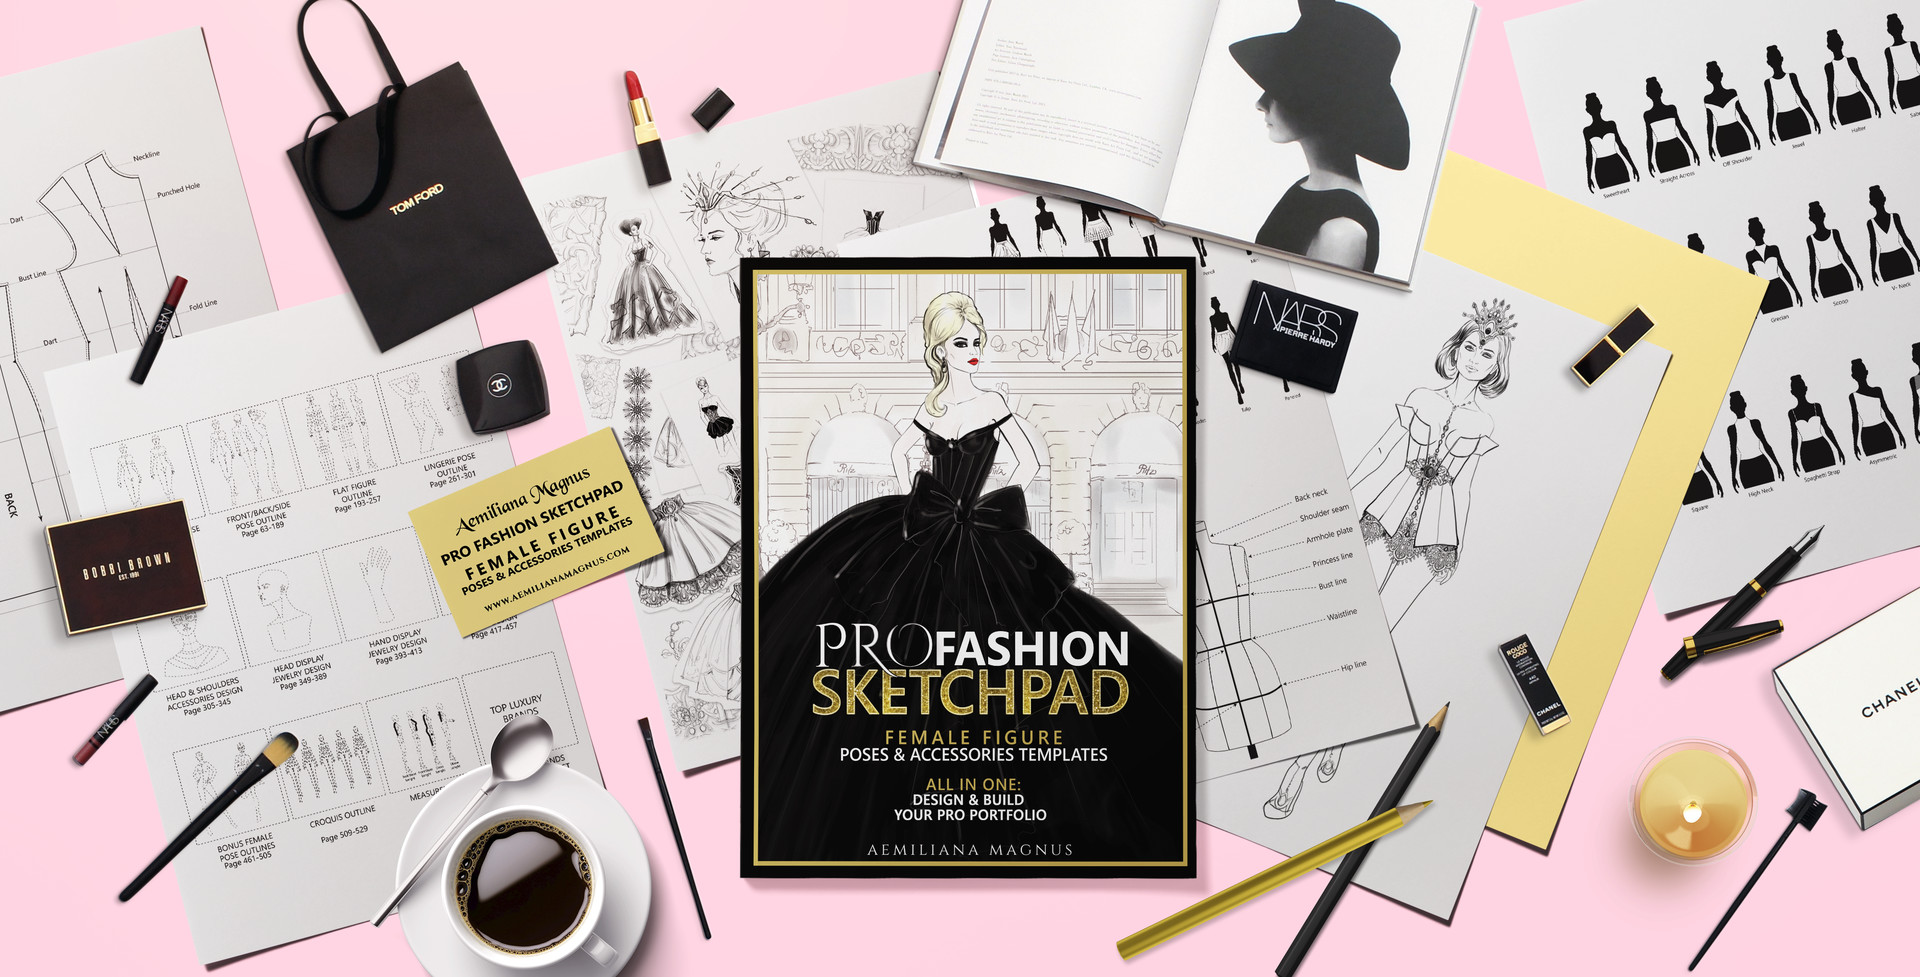 Fashion Sketchbook: Fashion Sketchbook with Figure Template, Large Female  Croquis For easily Sketching Your Fashion Design Styles and Building your  Portfolio. Fashion Sketchbook with Female Figure Poses. by Fashion Sketchpad,  Paperback